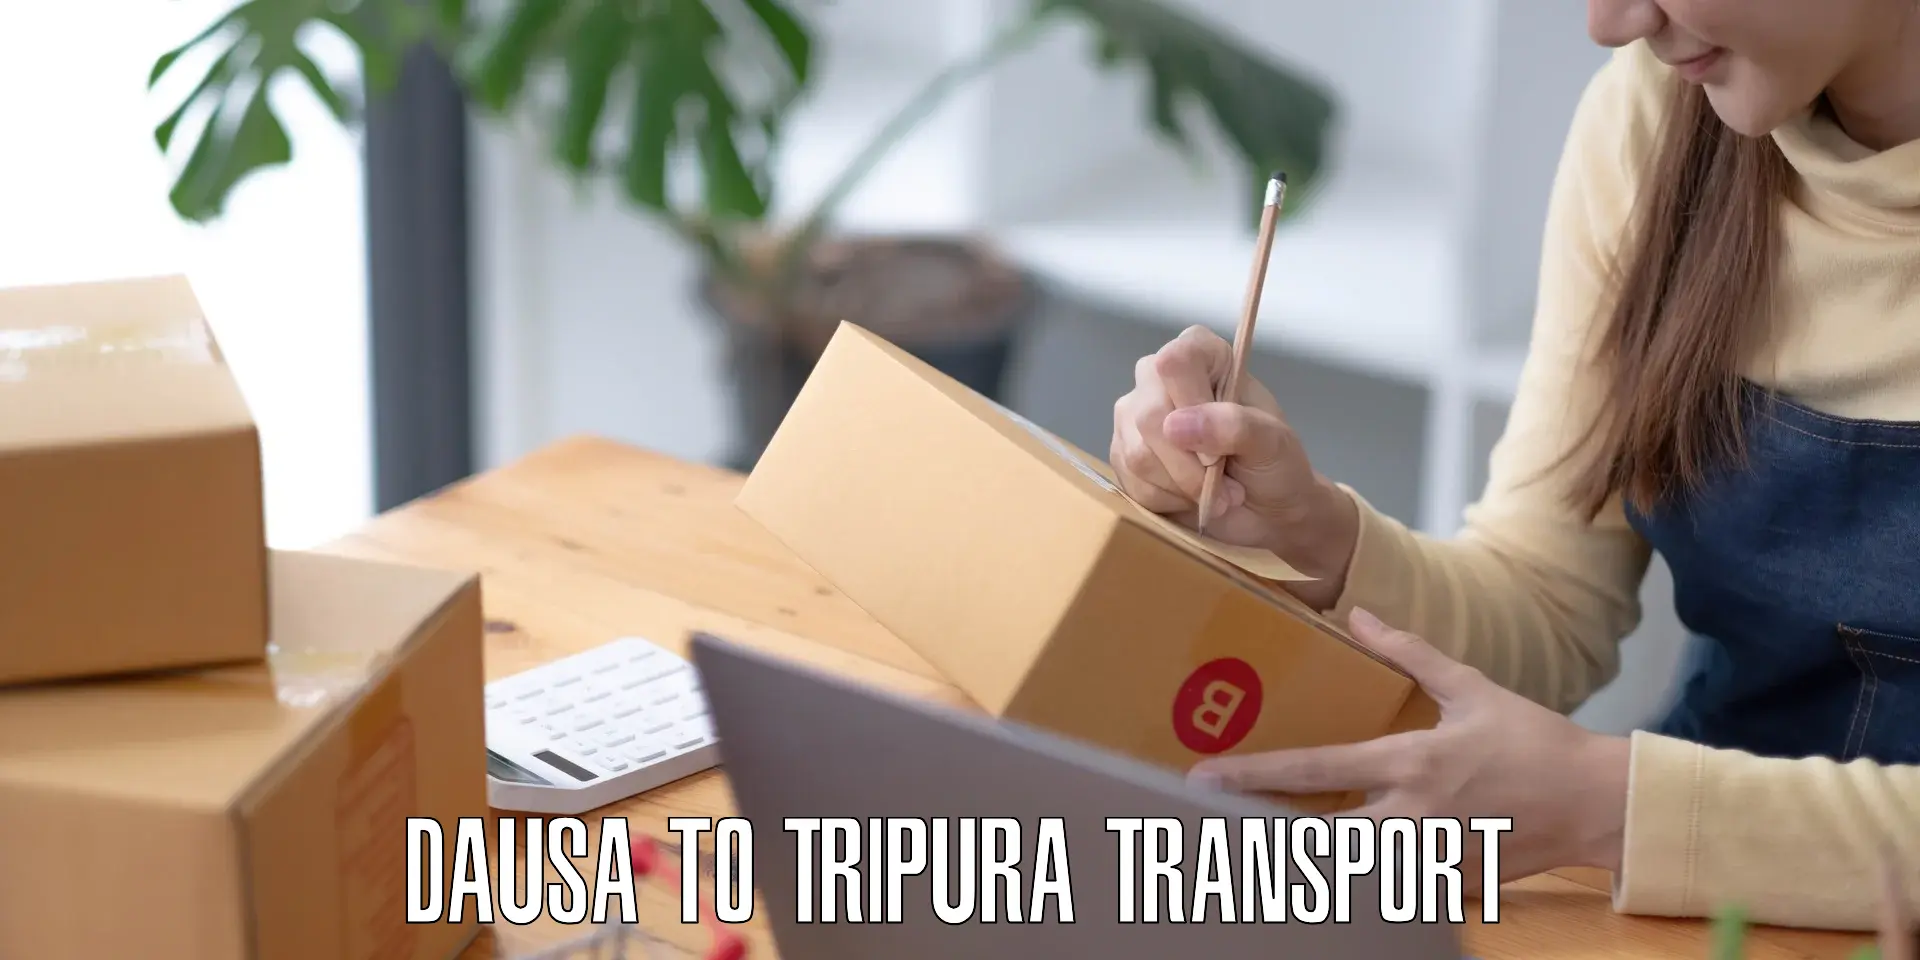 Commercial transport service Dausa to Tripura